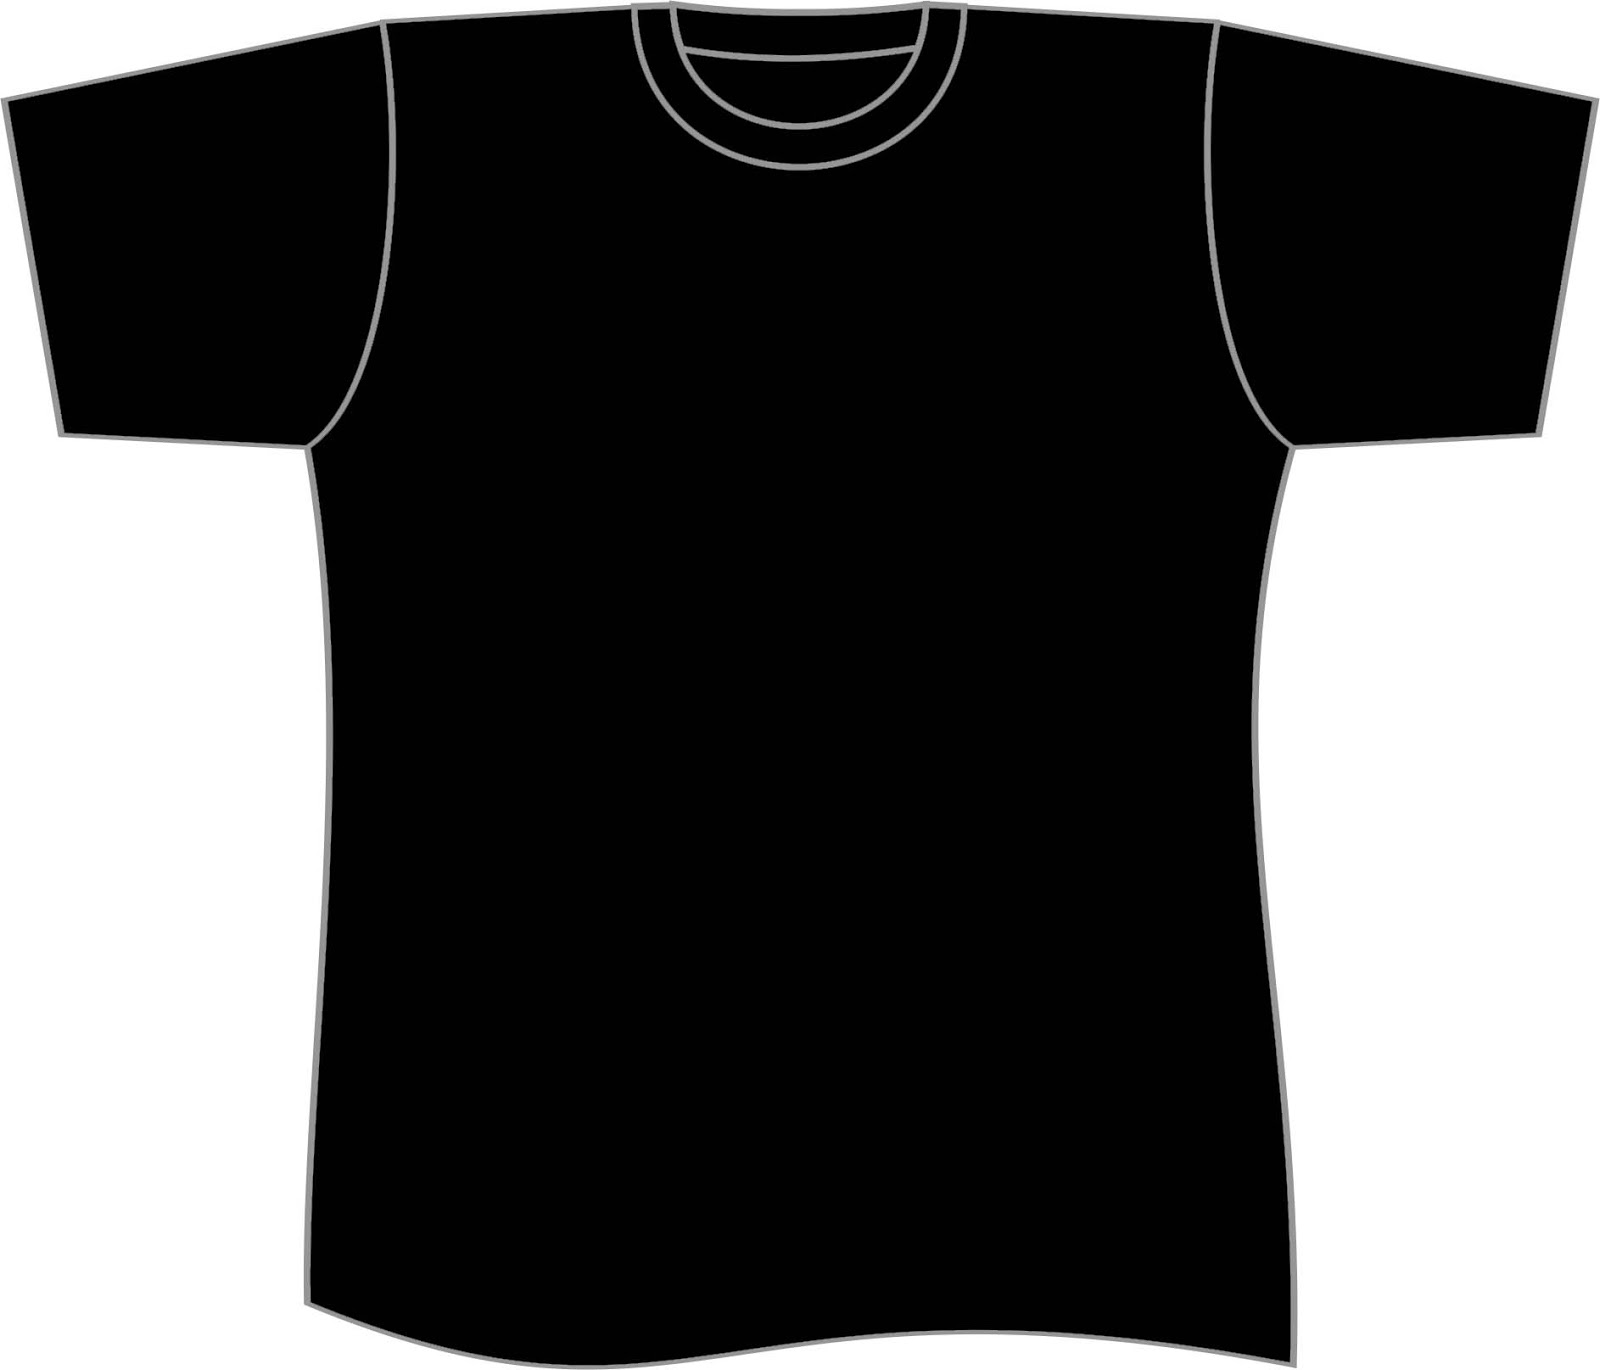 Not Buying Anything: Plain Black T-Shirt A Lesson In Globalism